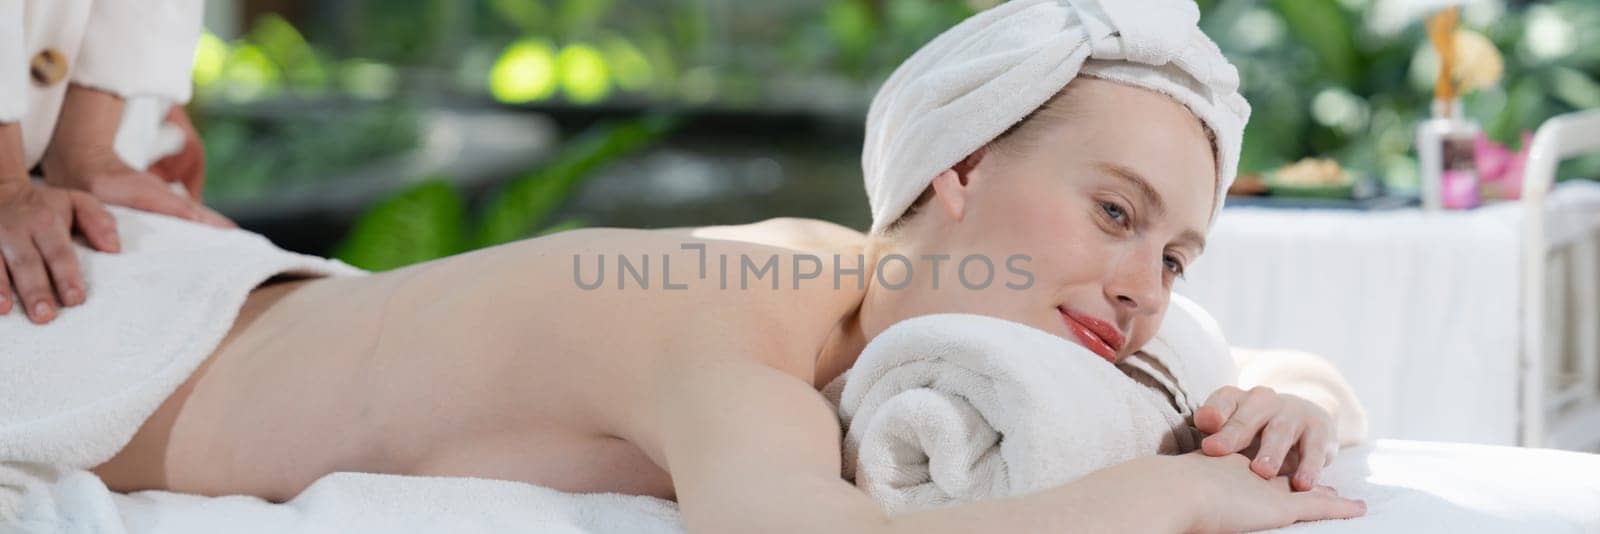 Beautiful relaxing woman having back massage surrounded by nature. Tranquility. by biancoblue